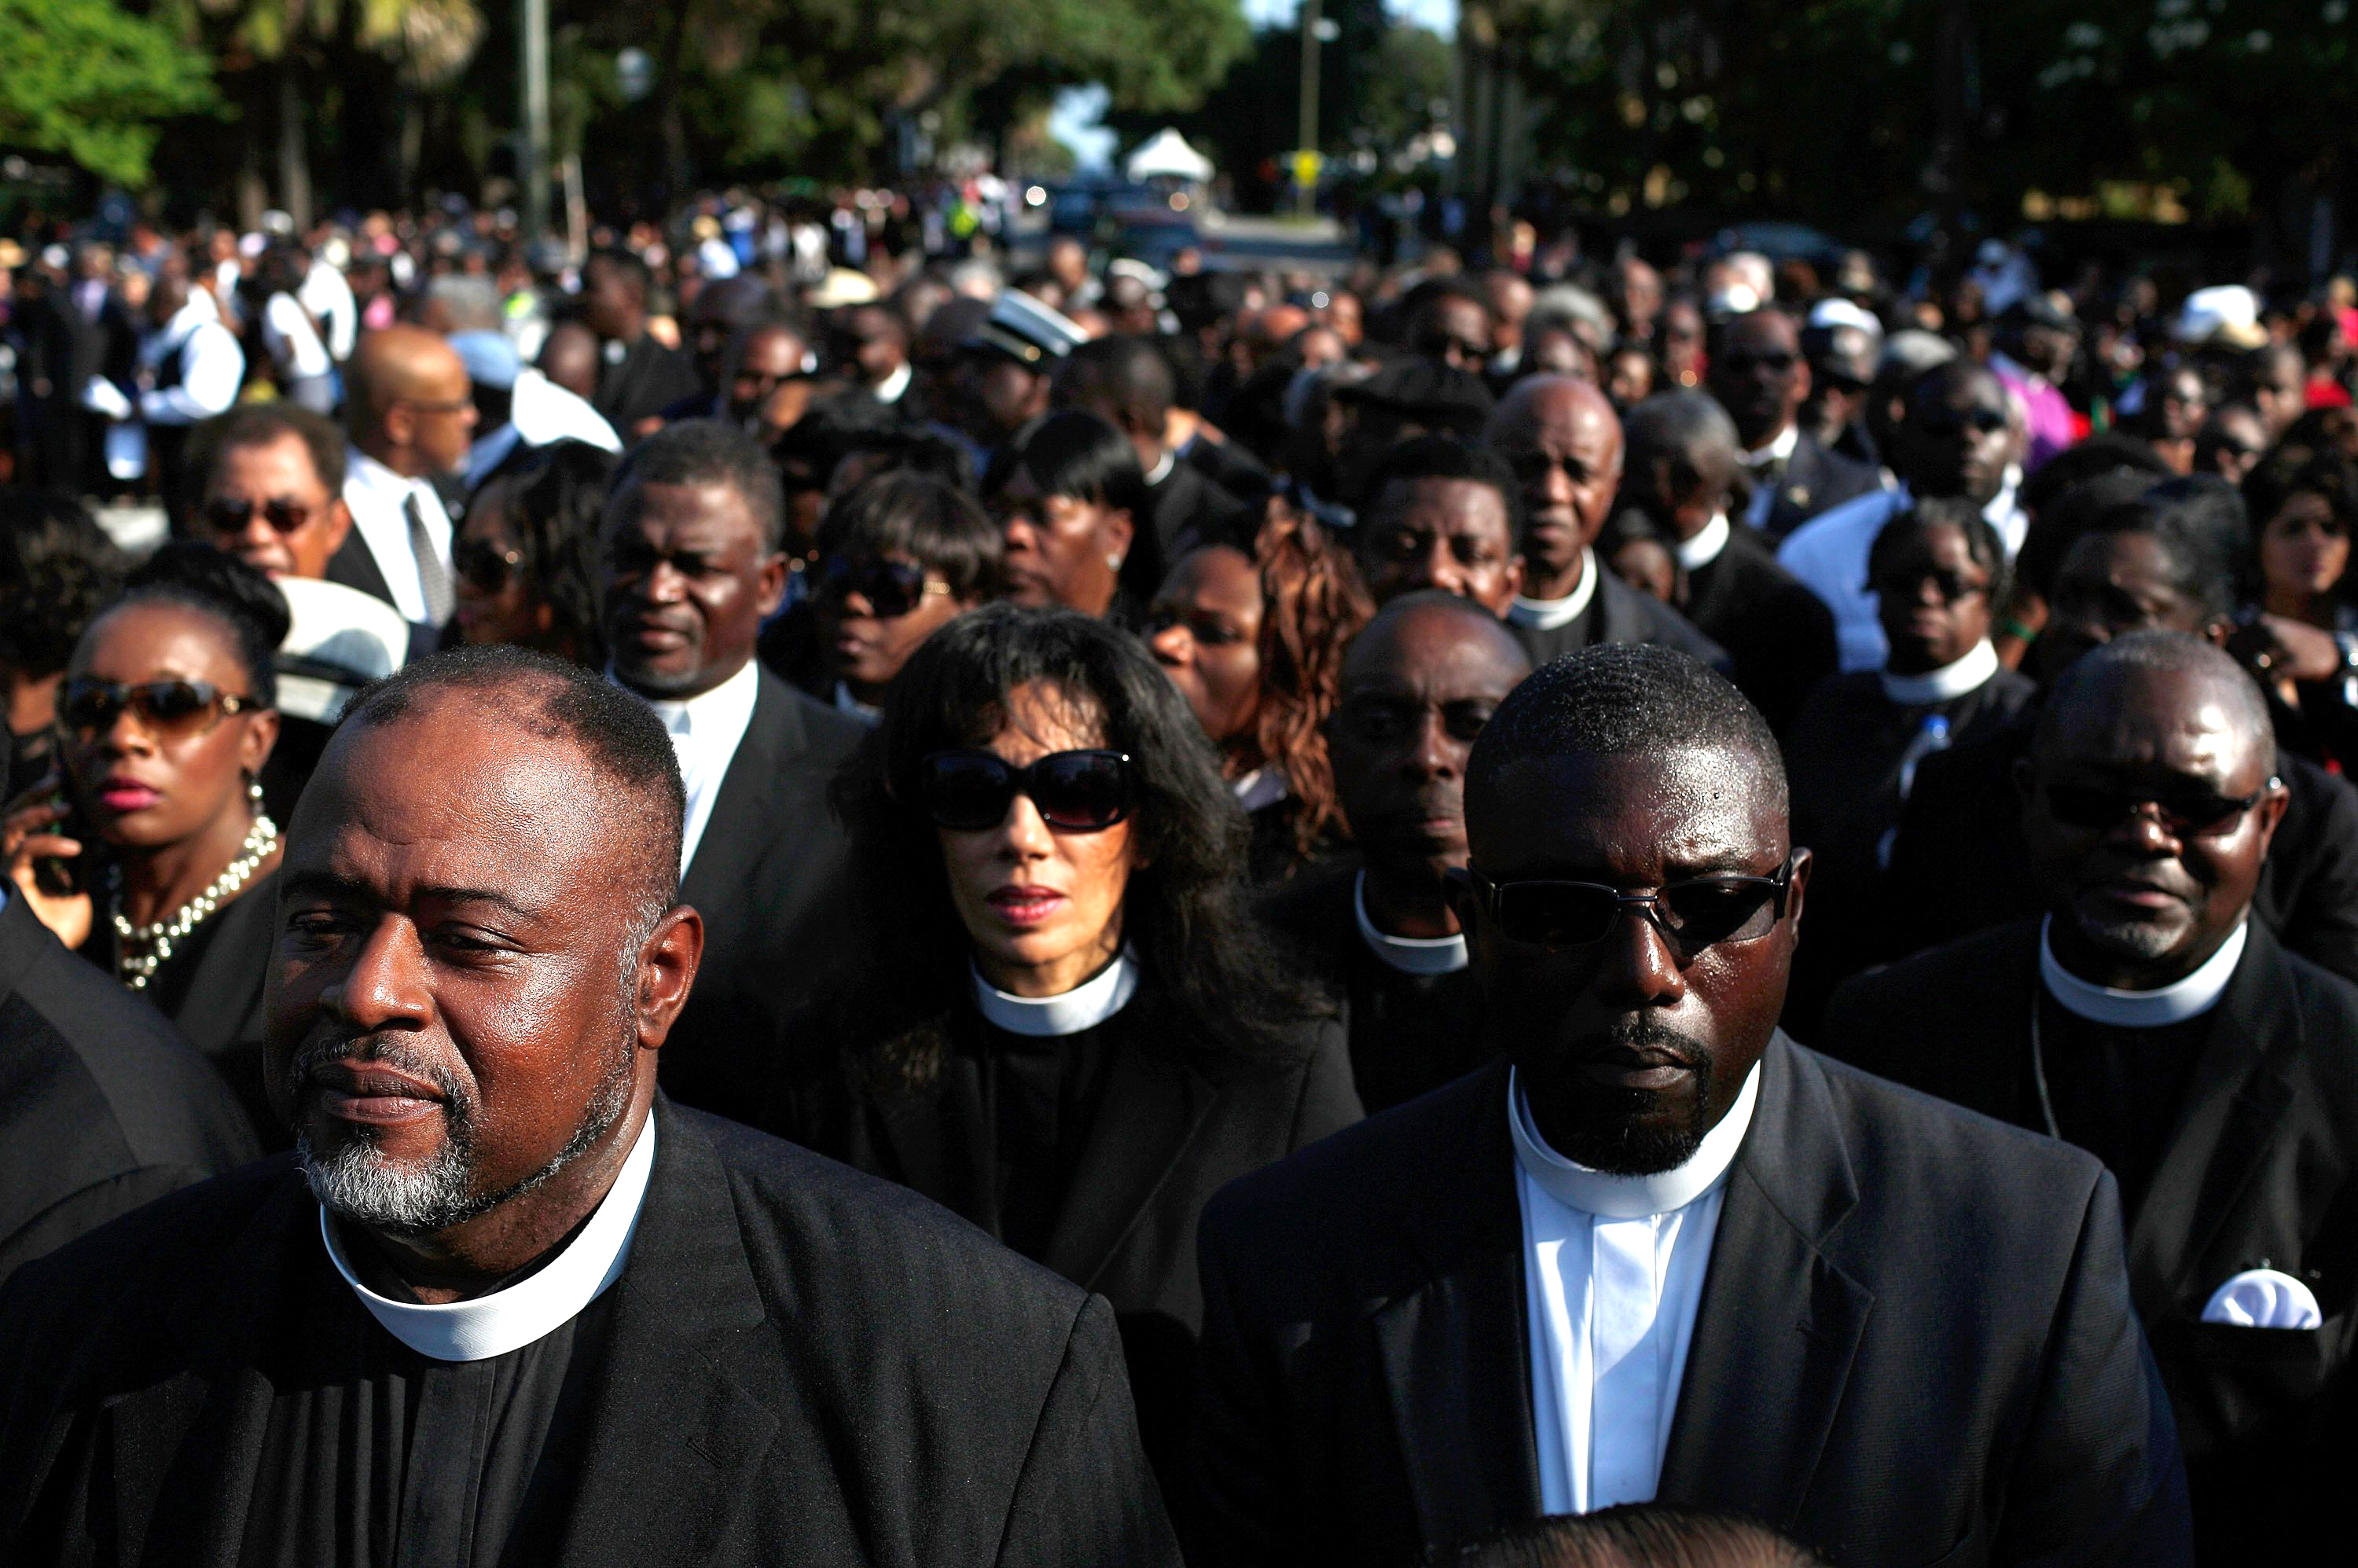 Members of the clergy wait to enter the funeral service where U.S. President Barack Obama will deliver the eulogy for South Carolina State senator and Rev. Clementa Pinckney who was killed along with eight others in a mass shooting June 26, 2015 in Charleston, S.C. (Win McNamee—Getty Images)